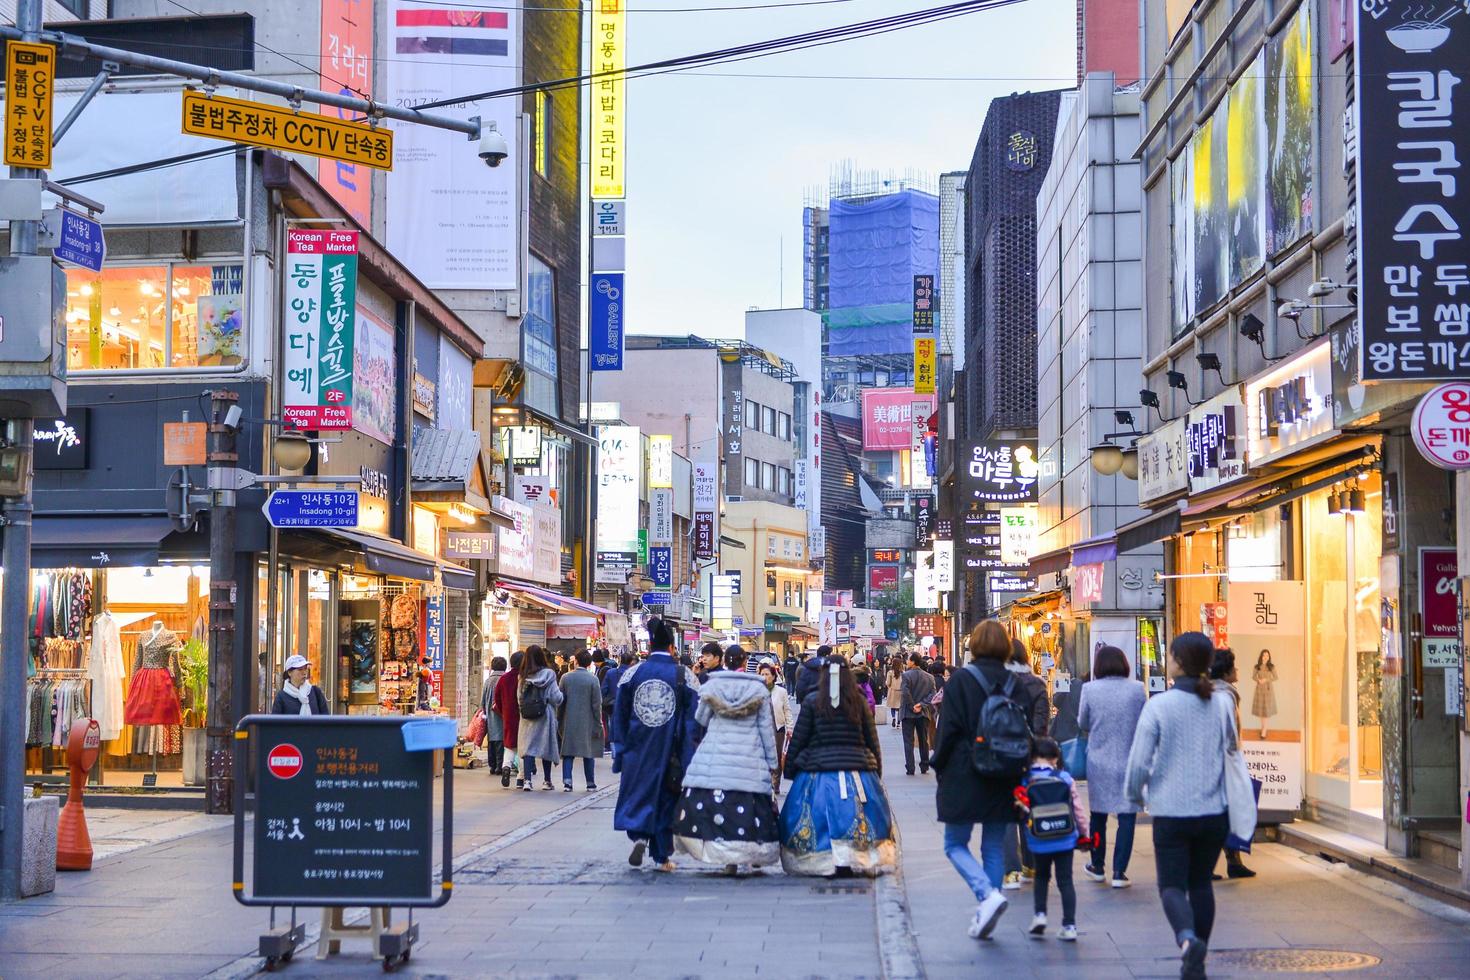 SEOUL, SOUTH KOREA - NOV 13, 2017-Insadong street is one of the most memorable attractions in Seoul Korea with many traditional antique shop, souvenir shops and restaurants photo